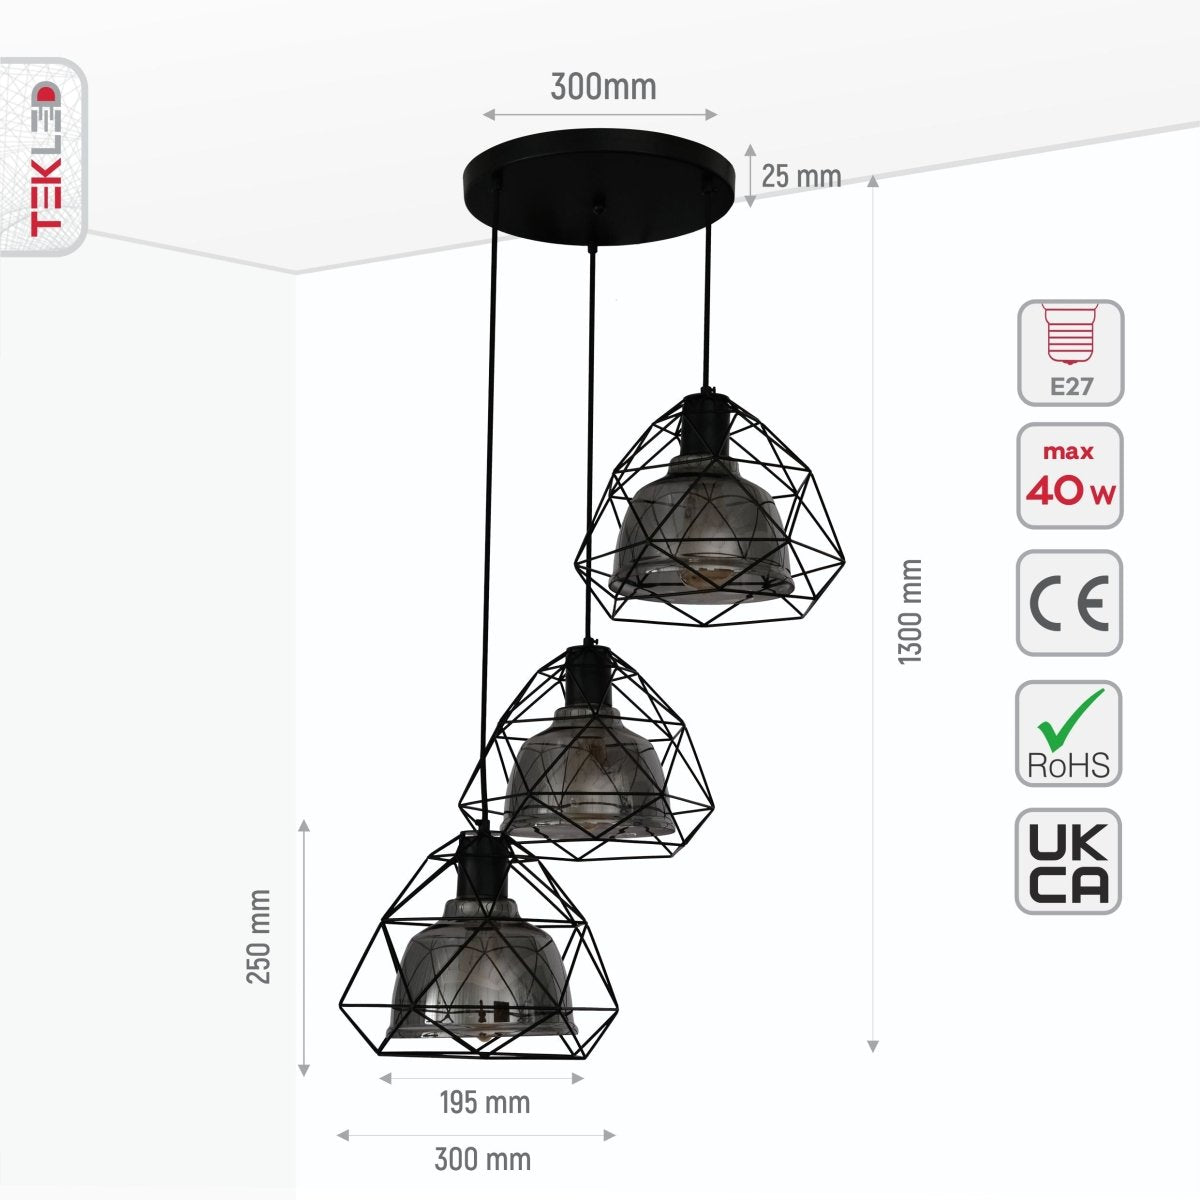 Size and specs of Smoky Glass Dome Black Metal Cage Pendant Light with 3xE27 Fitting | TEKLED 156-19482